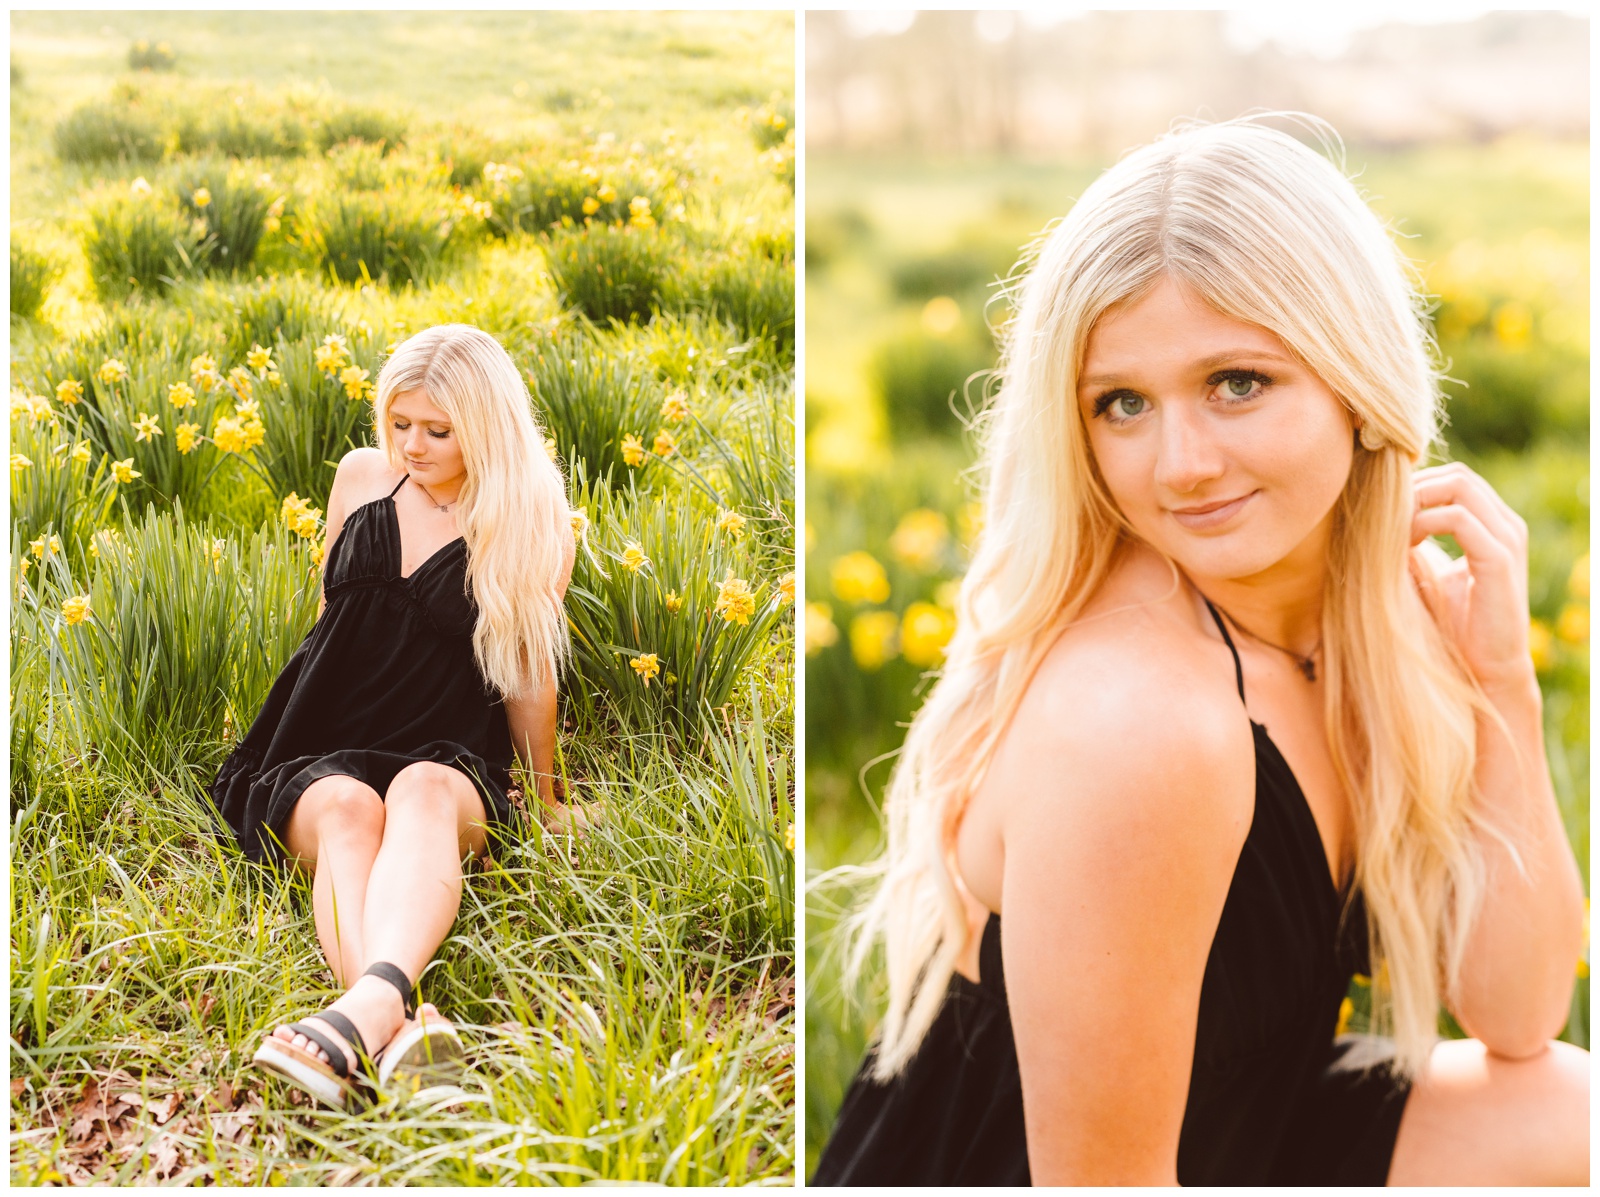 Colorful and Adventurous Senior Portrait Session on an Island - Brooke Michelle Photo